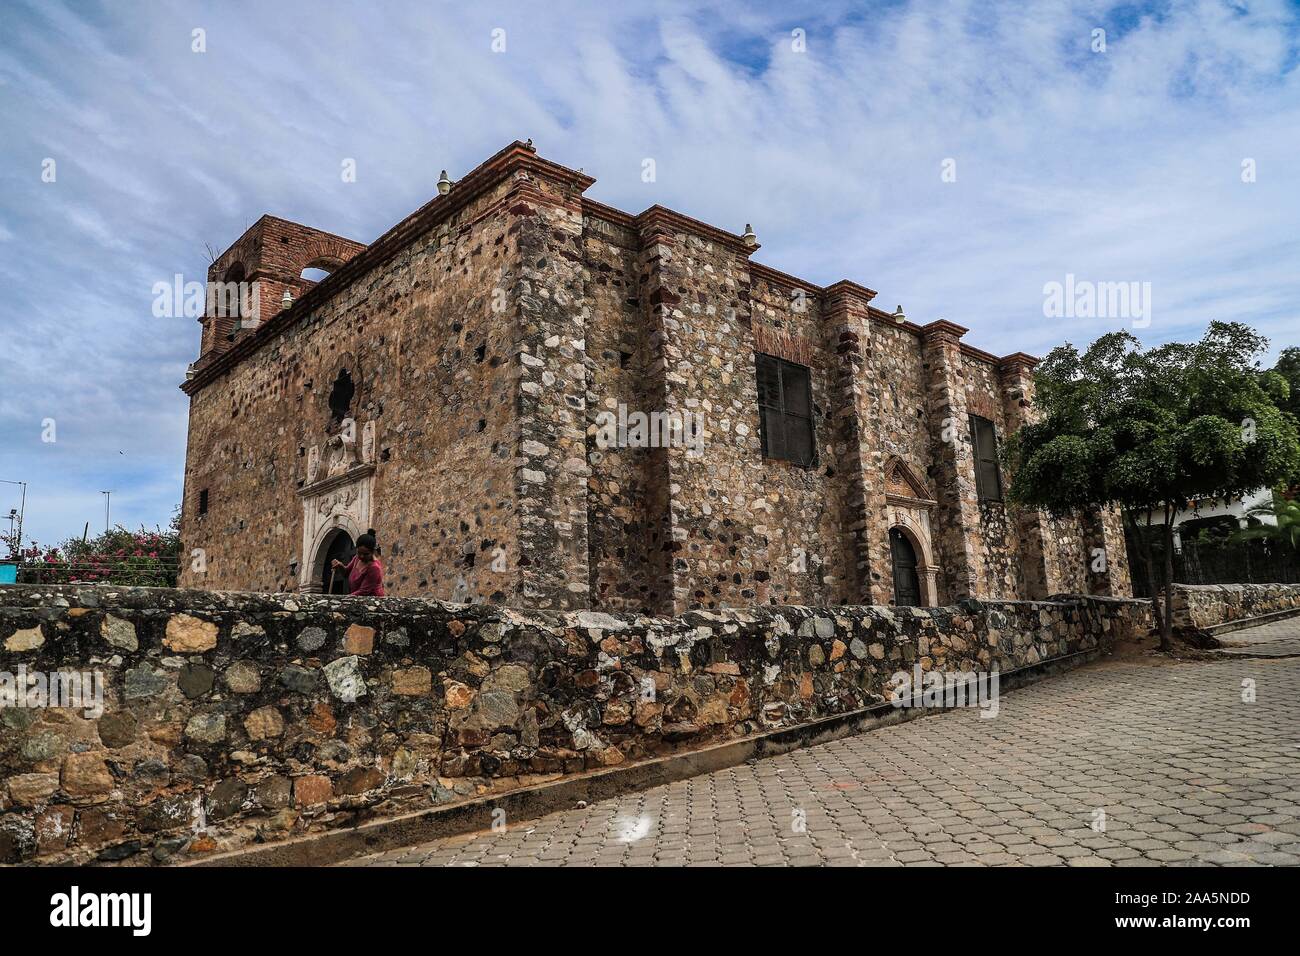 Chapel of the Virgin of the Balvanera in the La Aduana community in Alamos, Sonora Mexico. The adoration of 'La Valvanera' in Sonora is in honor of the maiden, Virgen de la Valvanera. More than 400 years ago or sixteenth century they perform invocation on November 19. From 45 to 300 kilometers are traveled by pilgrims from different cities of Sonora, Sinaloa and Chihuahua to reach the small chapel of the Virgen de la Balvanera in the community of La Aduana. The invocation is a religious celebration or celebration of a figure © (© Photo: LuisGutierrez / NortePhoto.com)  Capilla de la virgen de Stock Photo